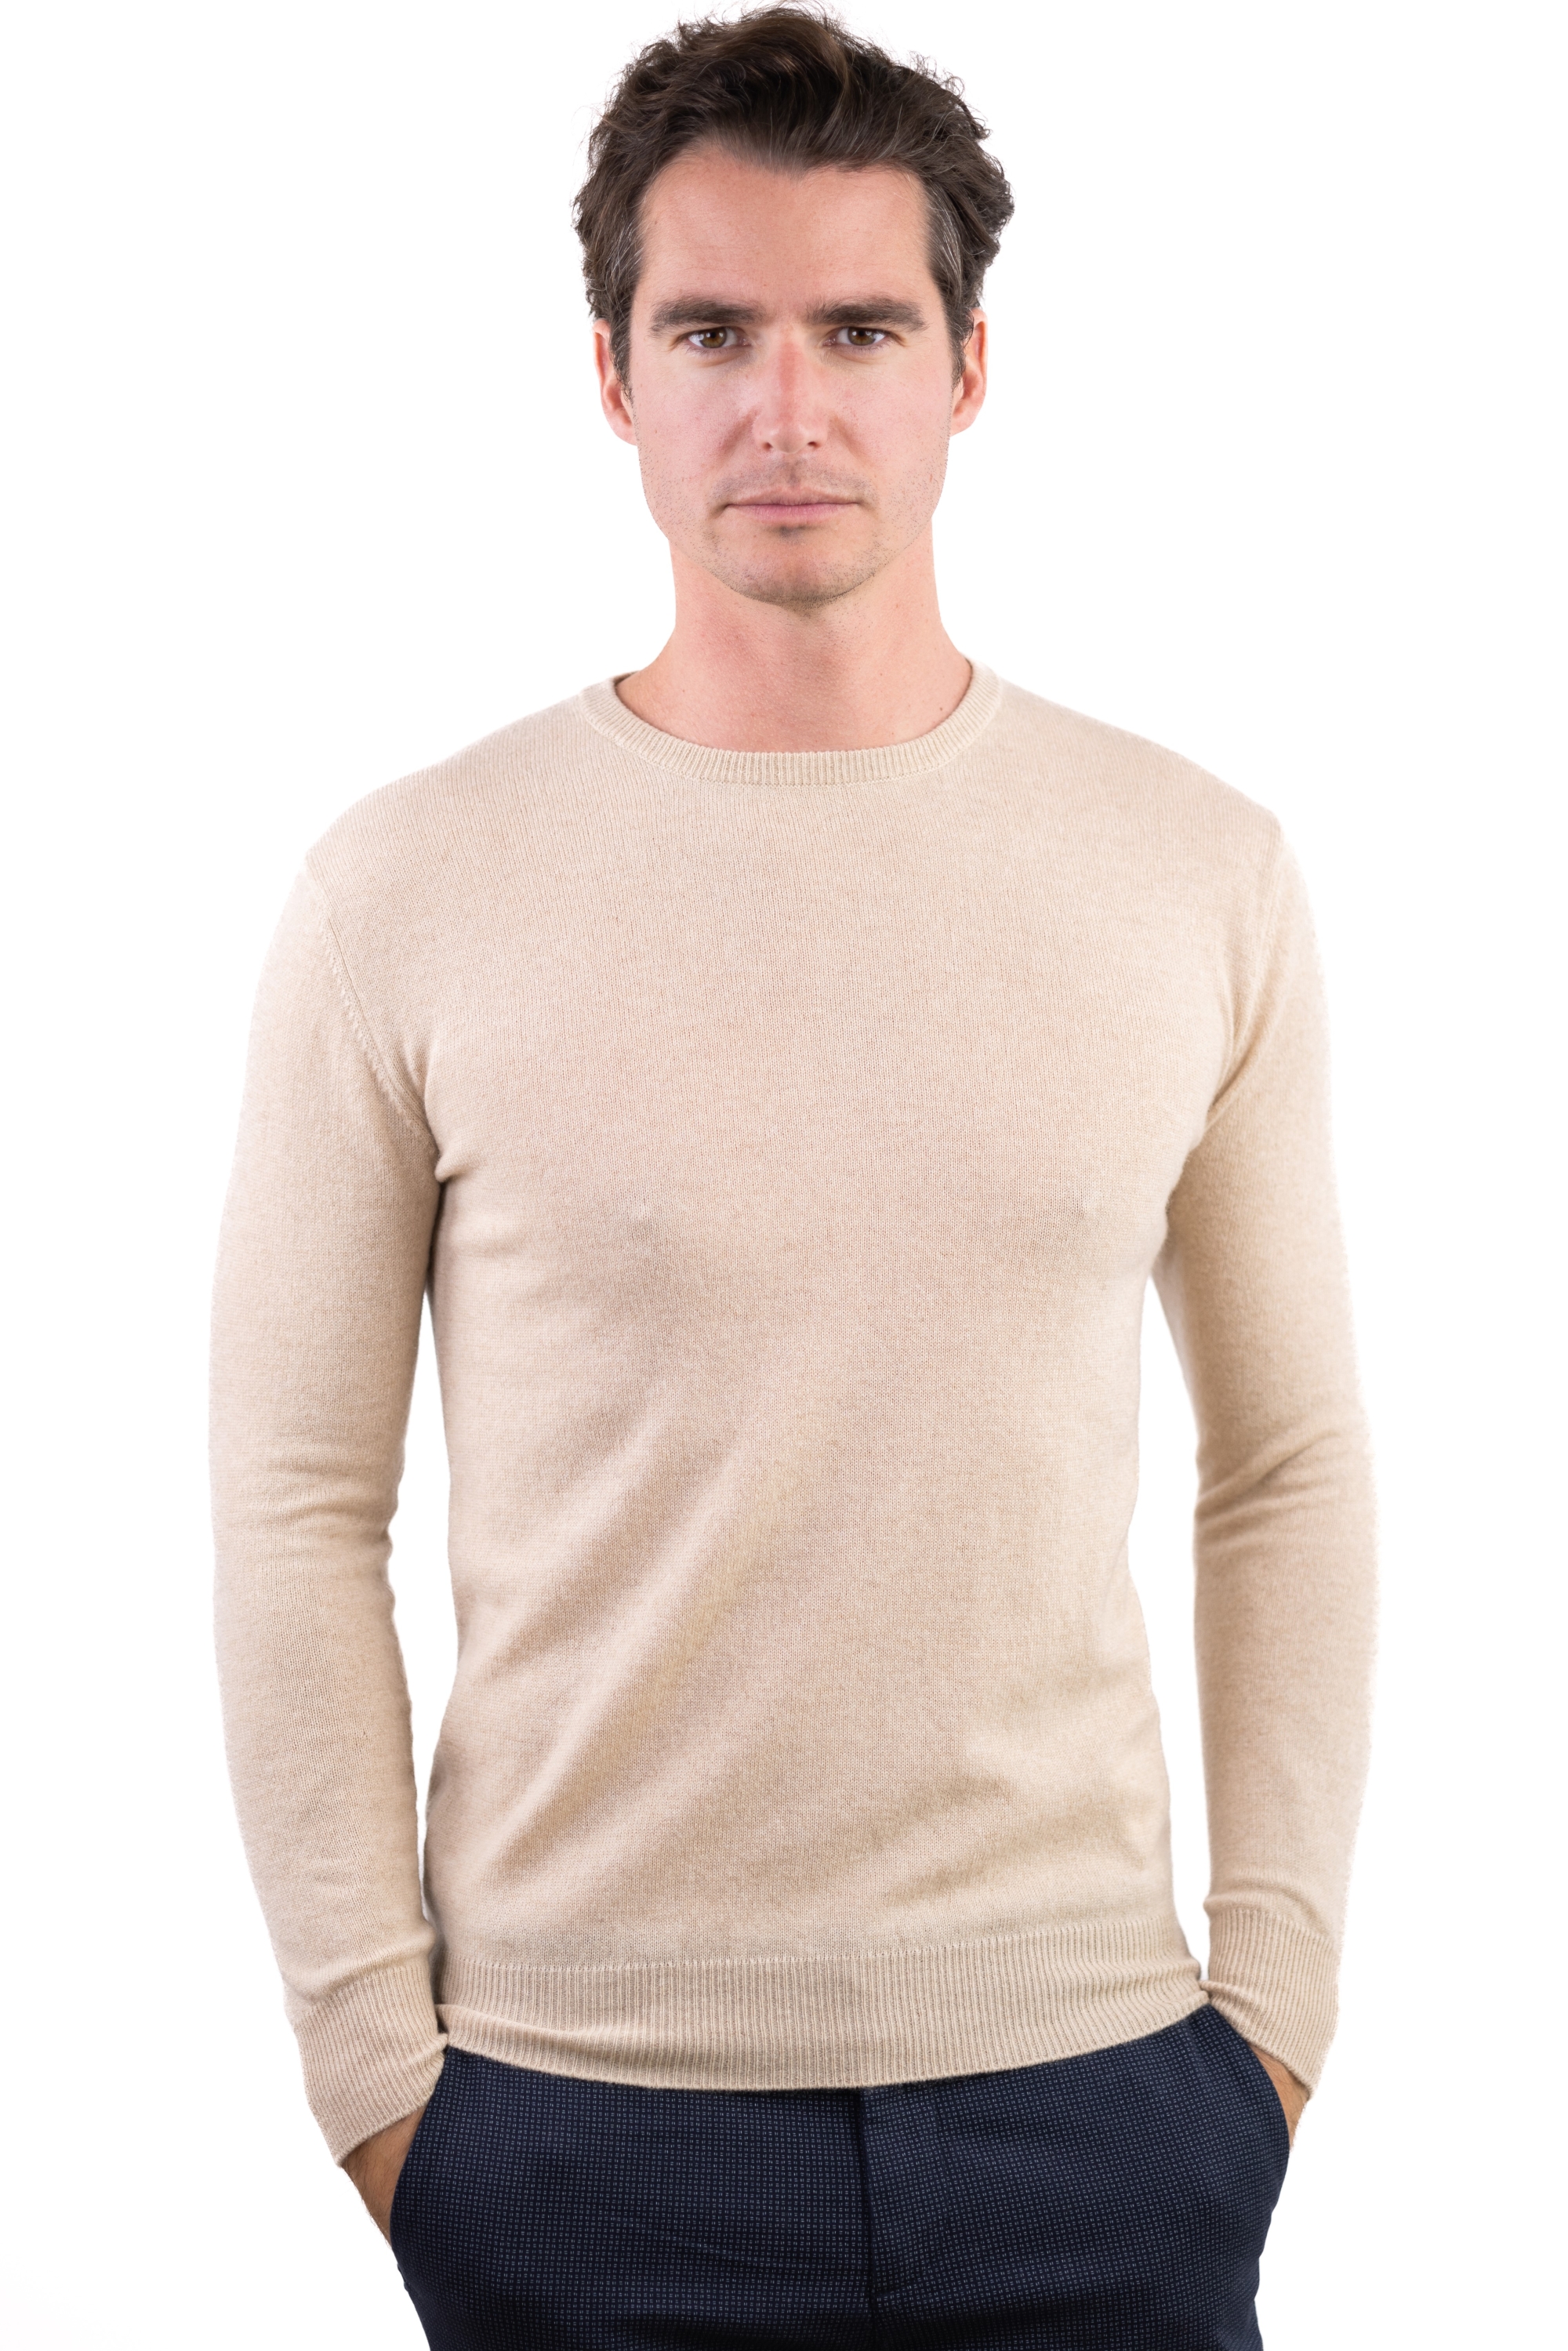 Cachemire pull homme col rond keaton natural beige 3xl